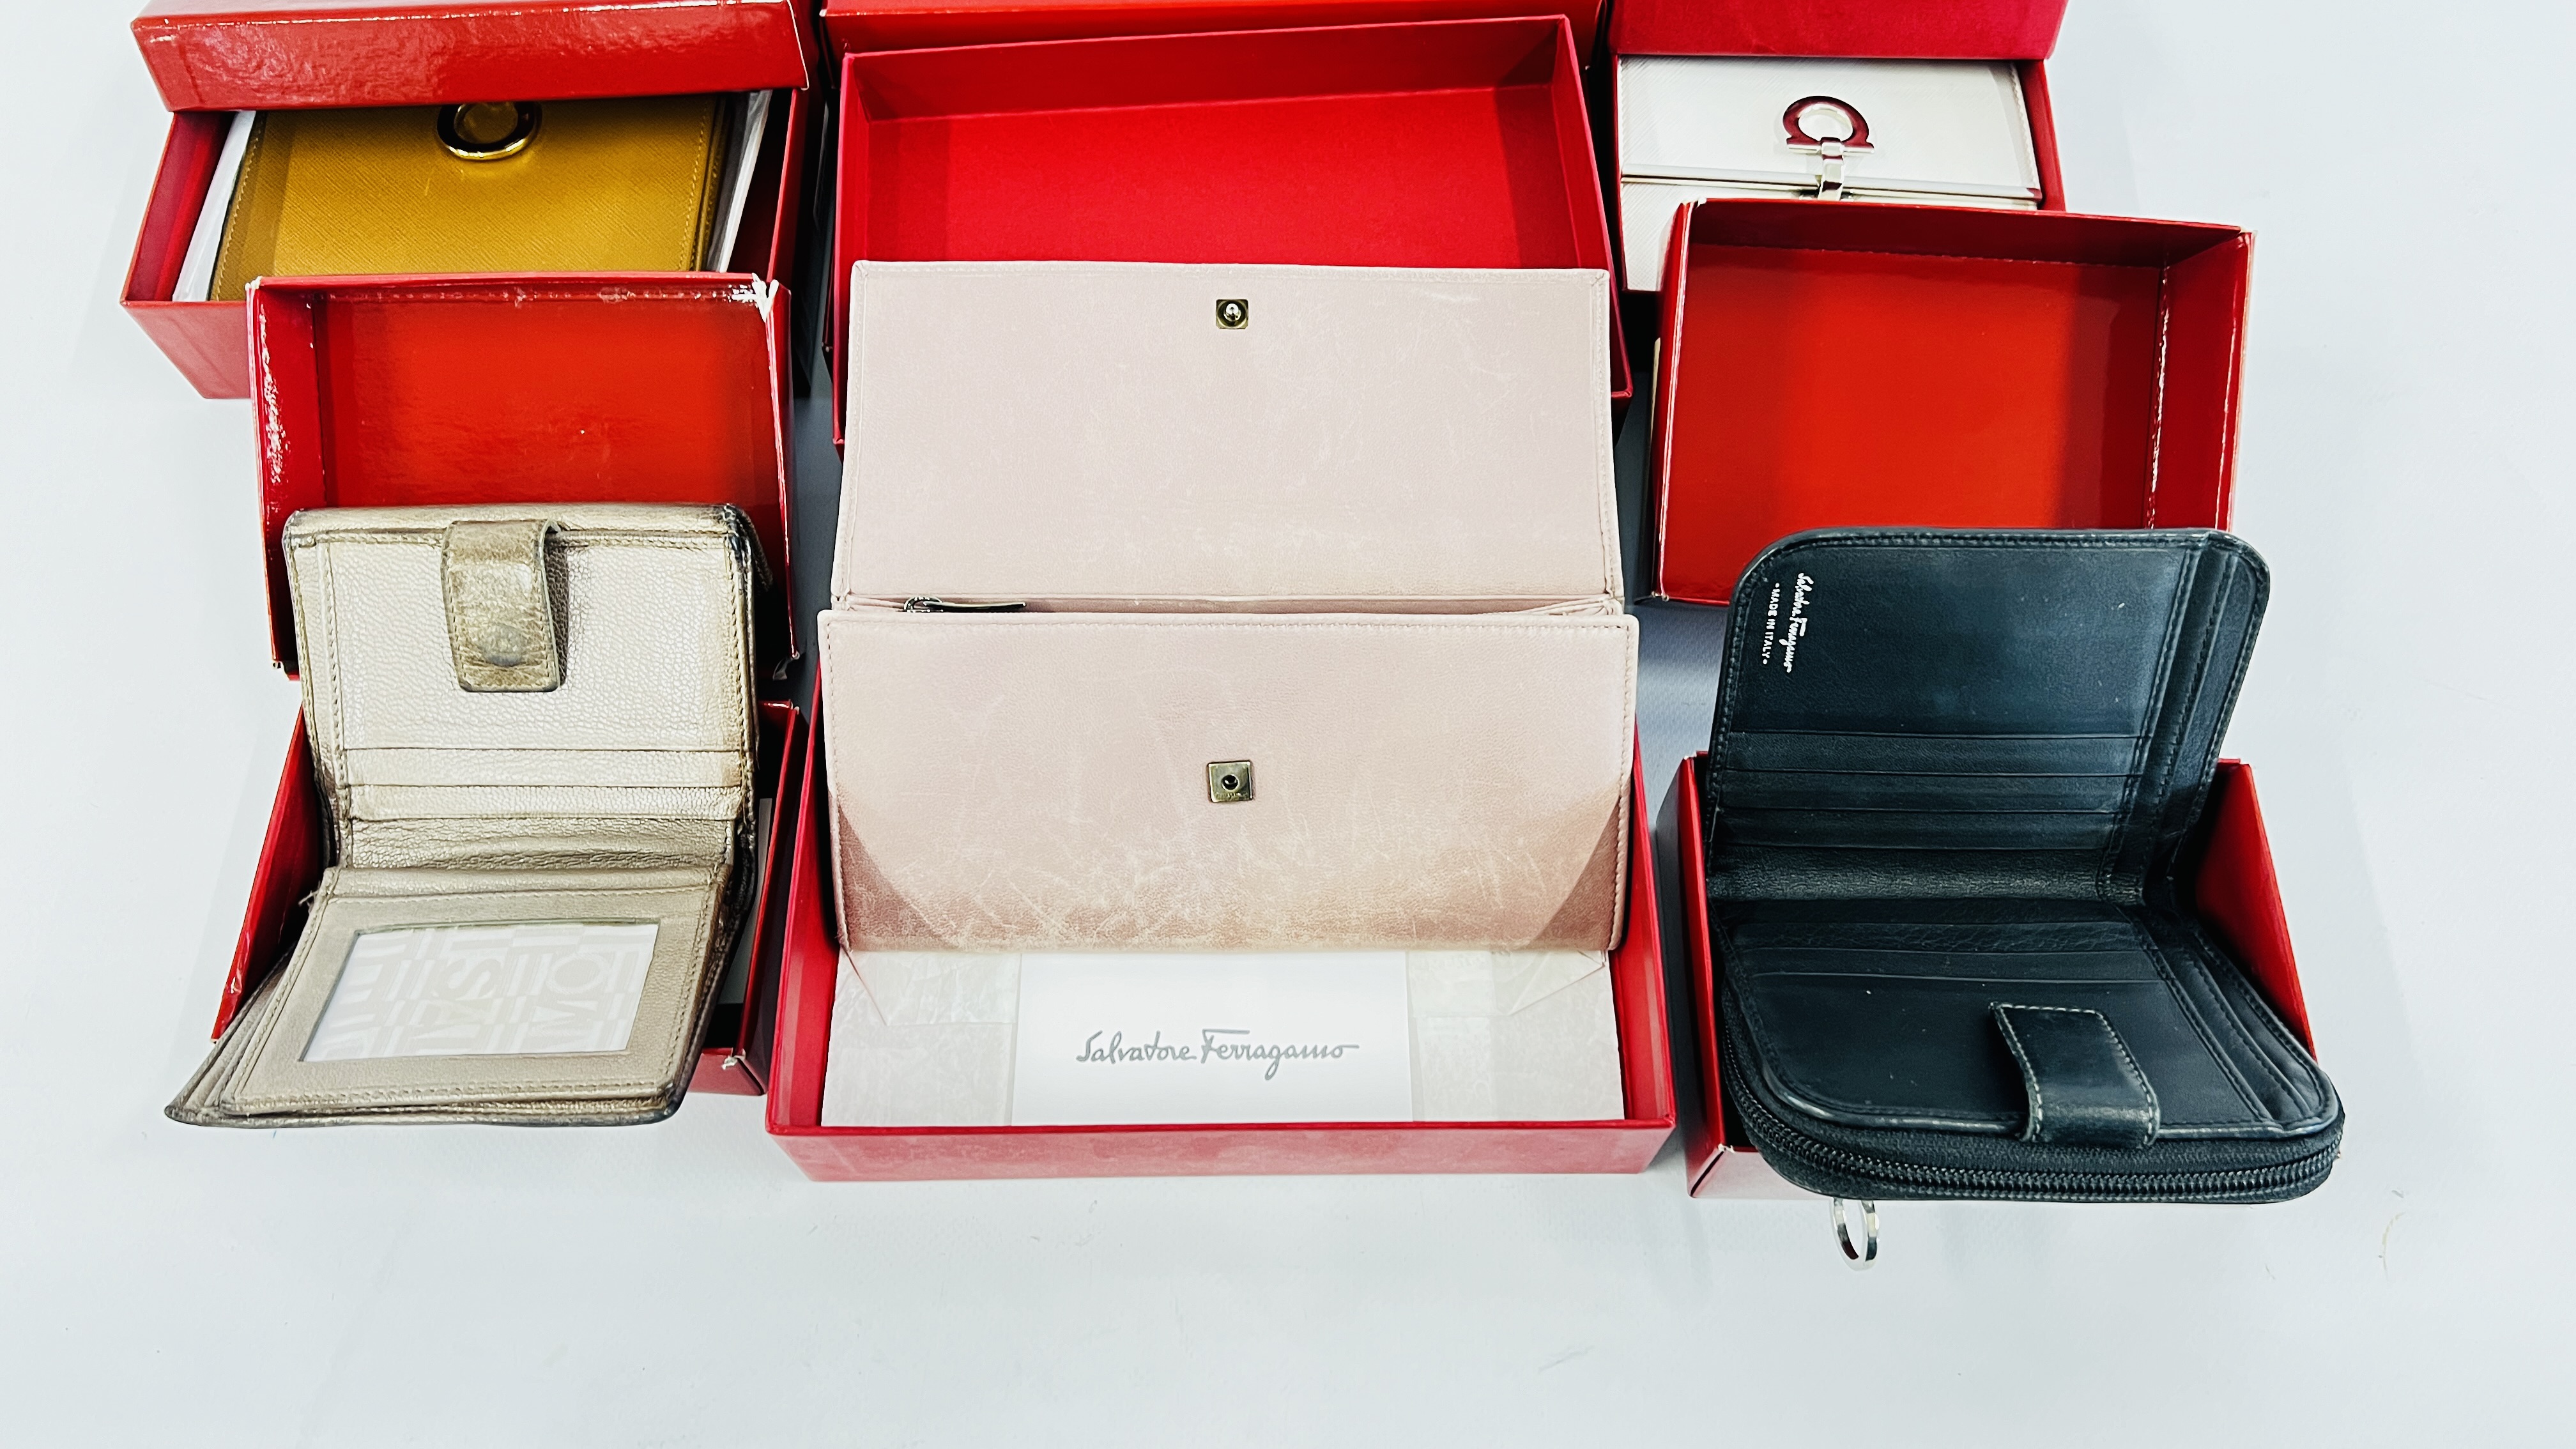 A GROUP OF 6 BOXED DESIGNER PURSES MARKED "SALVADOR FERRAGAMA". - Image 3 of 5